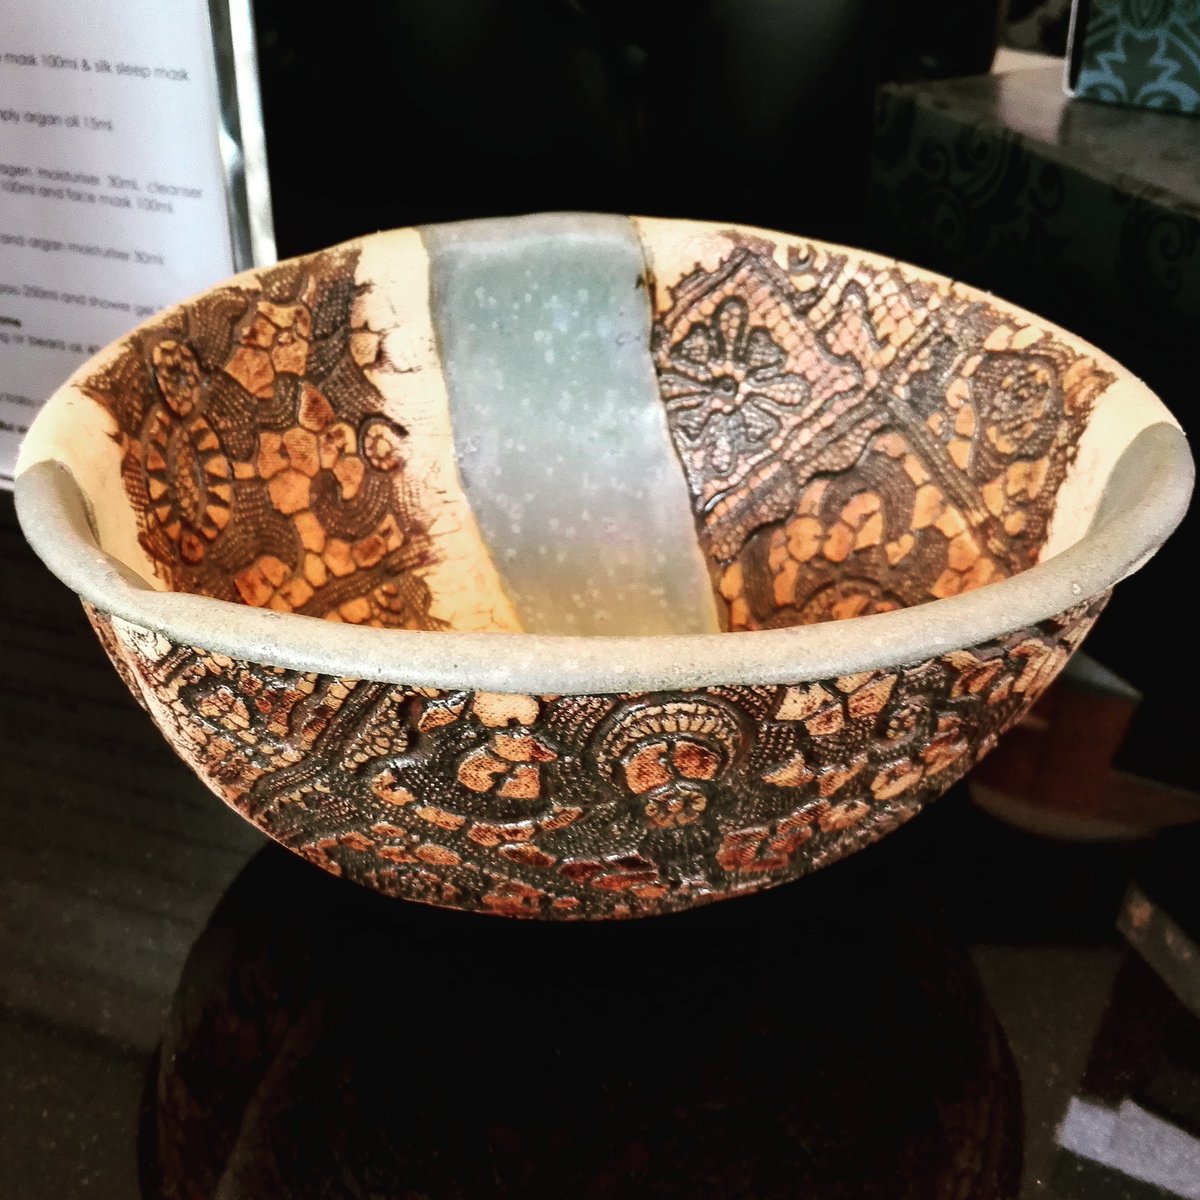 2 of our collection have been sold and this is a new piece just up for sale. £100 for this unique artwork. Come into the shop and have a look for yourself.
#getitwhileyoucan #Wilmslow #Cheshire #artwork #pottery #moroccaninspired #artincheshire #uniquegifts